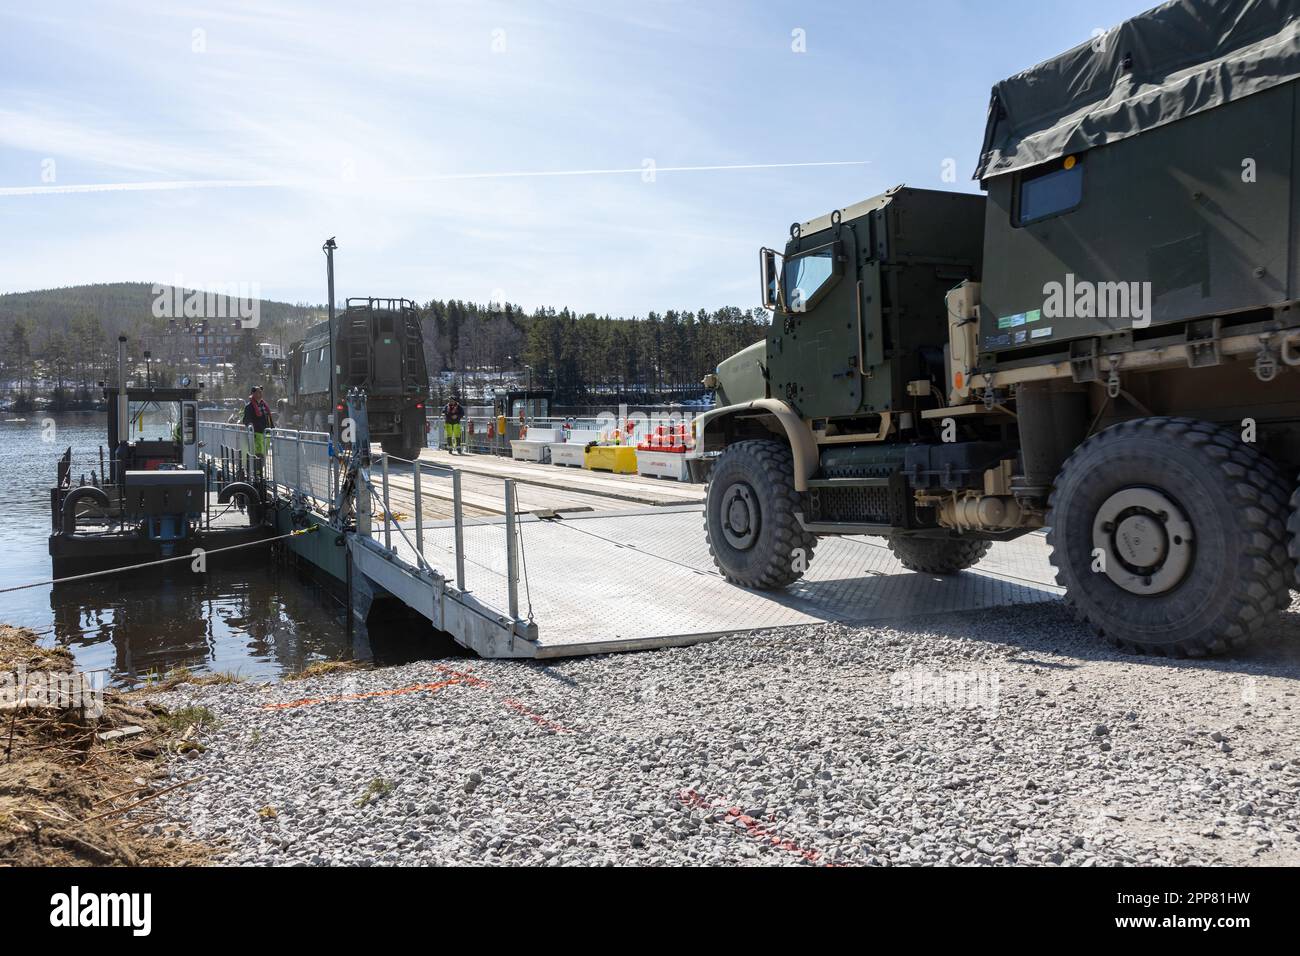 U.S. Marines with 2d Combat Engineer Battalion, 2d Marine Division, board a ferry during ferry crossing operations near Sveg, Sweden, April 18, 2023. Marines are deployed to Norway as part of Marine Rotational Forces Europe 23.1 which focuses on regional engagements throughout Europe by conducting various exercises, arctic cold-weather and mountain warfare training, and military-to-military engagements, which enhance overall interoperability of the U.S. Marine Corps with allies and partners. (U.S. Marine Corps photo by Sgt. Christian M. Garcia) Stock Photo